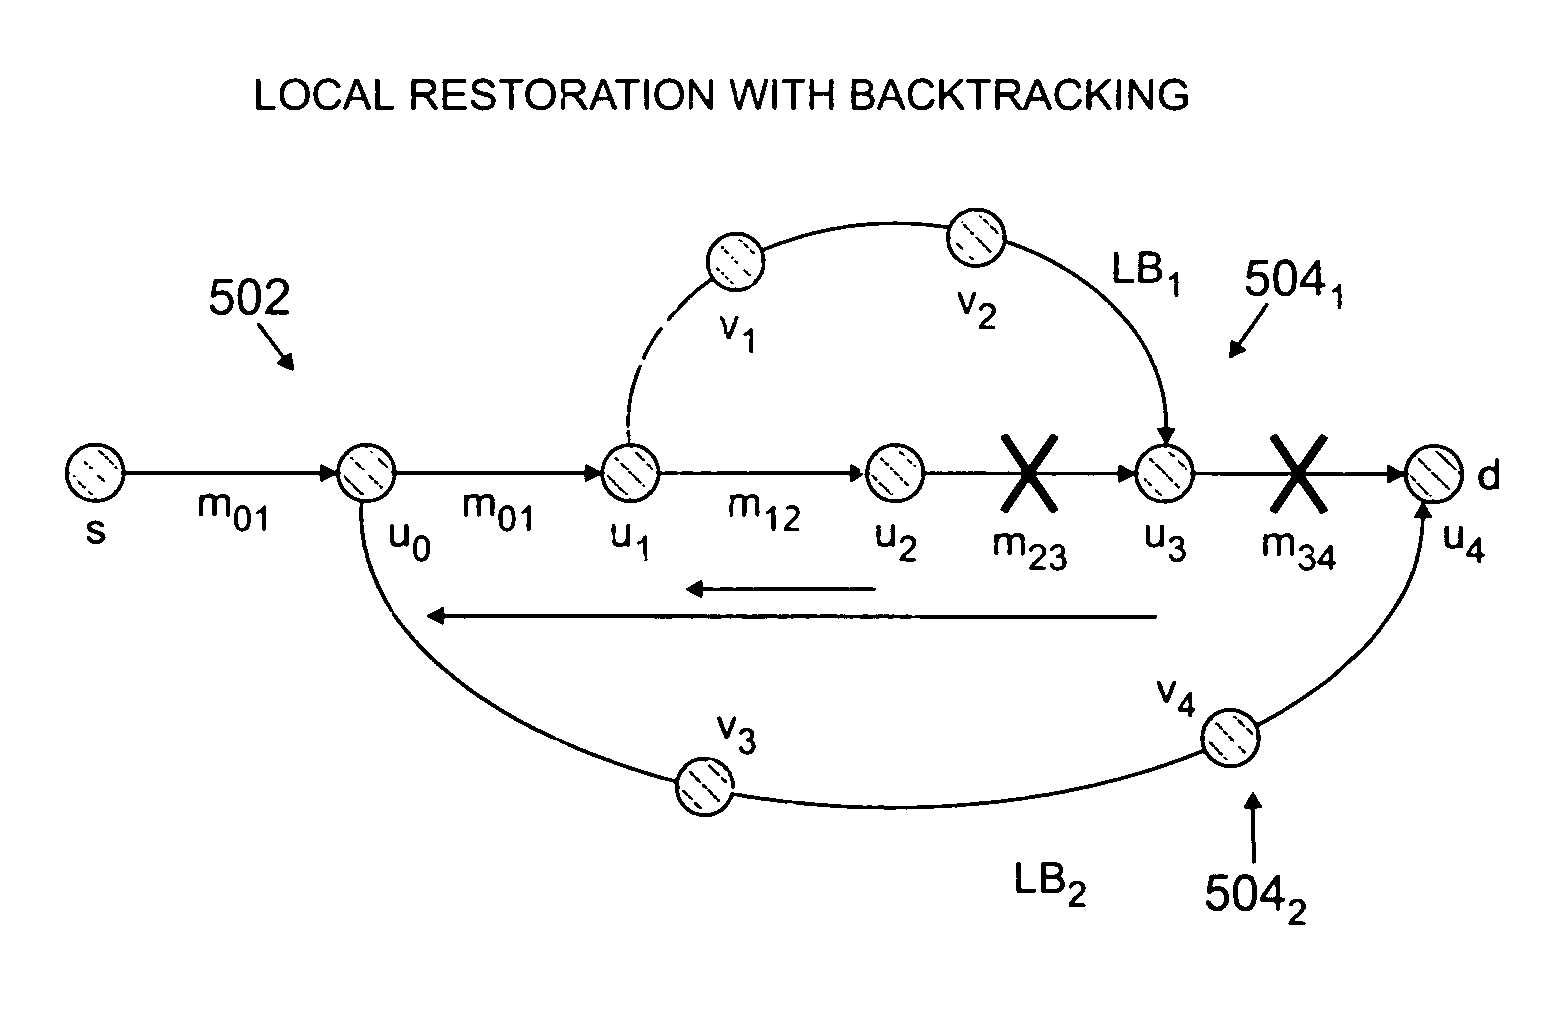 Routing bandwidth guaranteed paths with local restoration in label switched networks